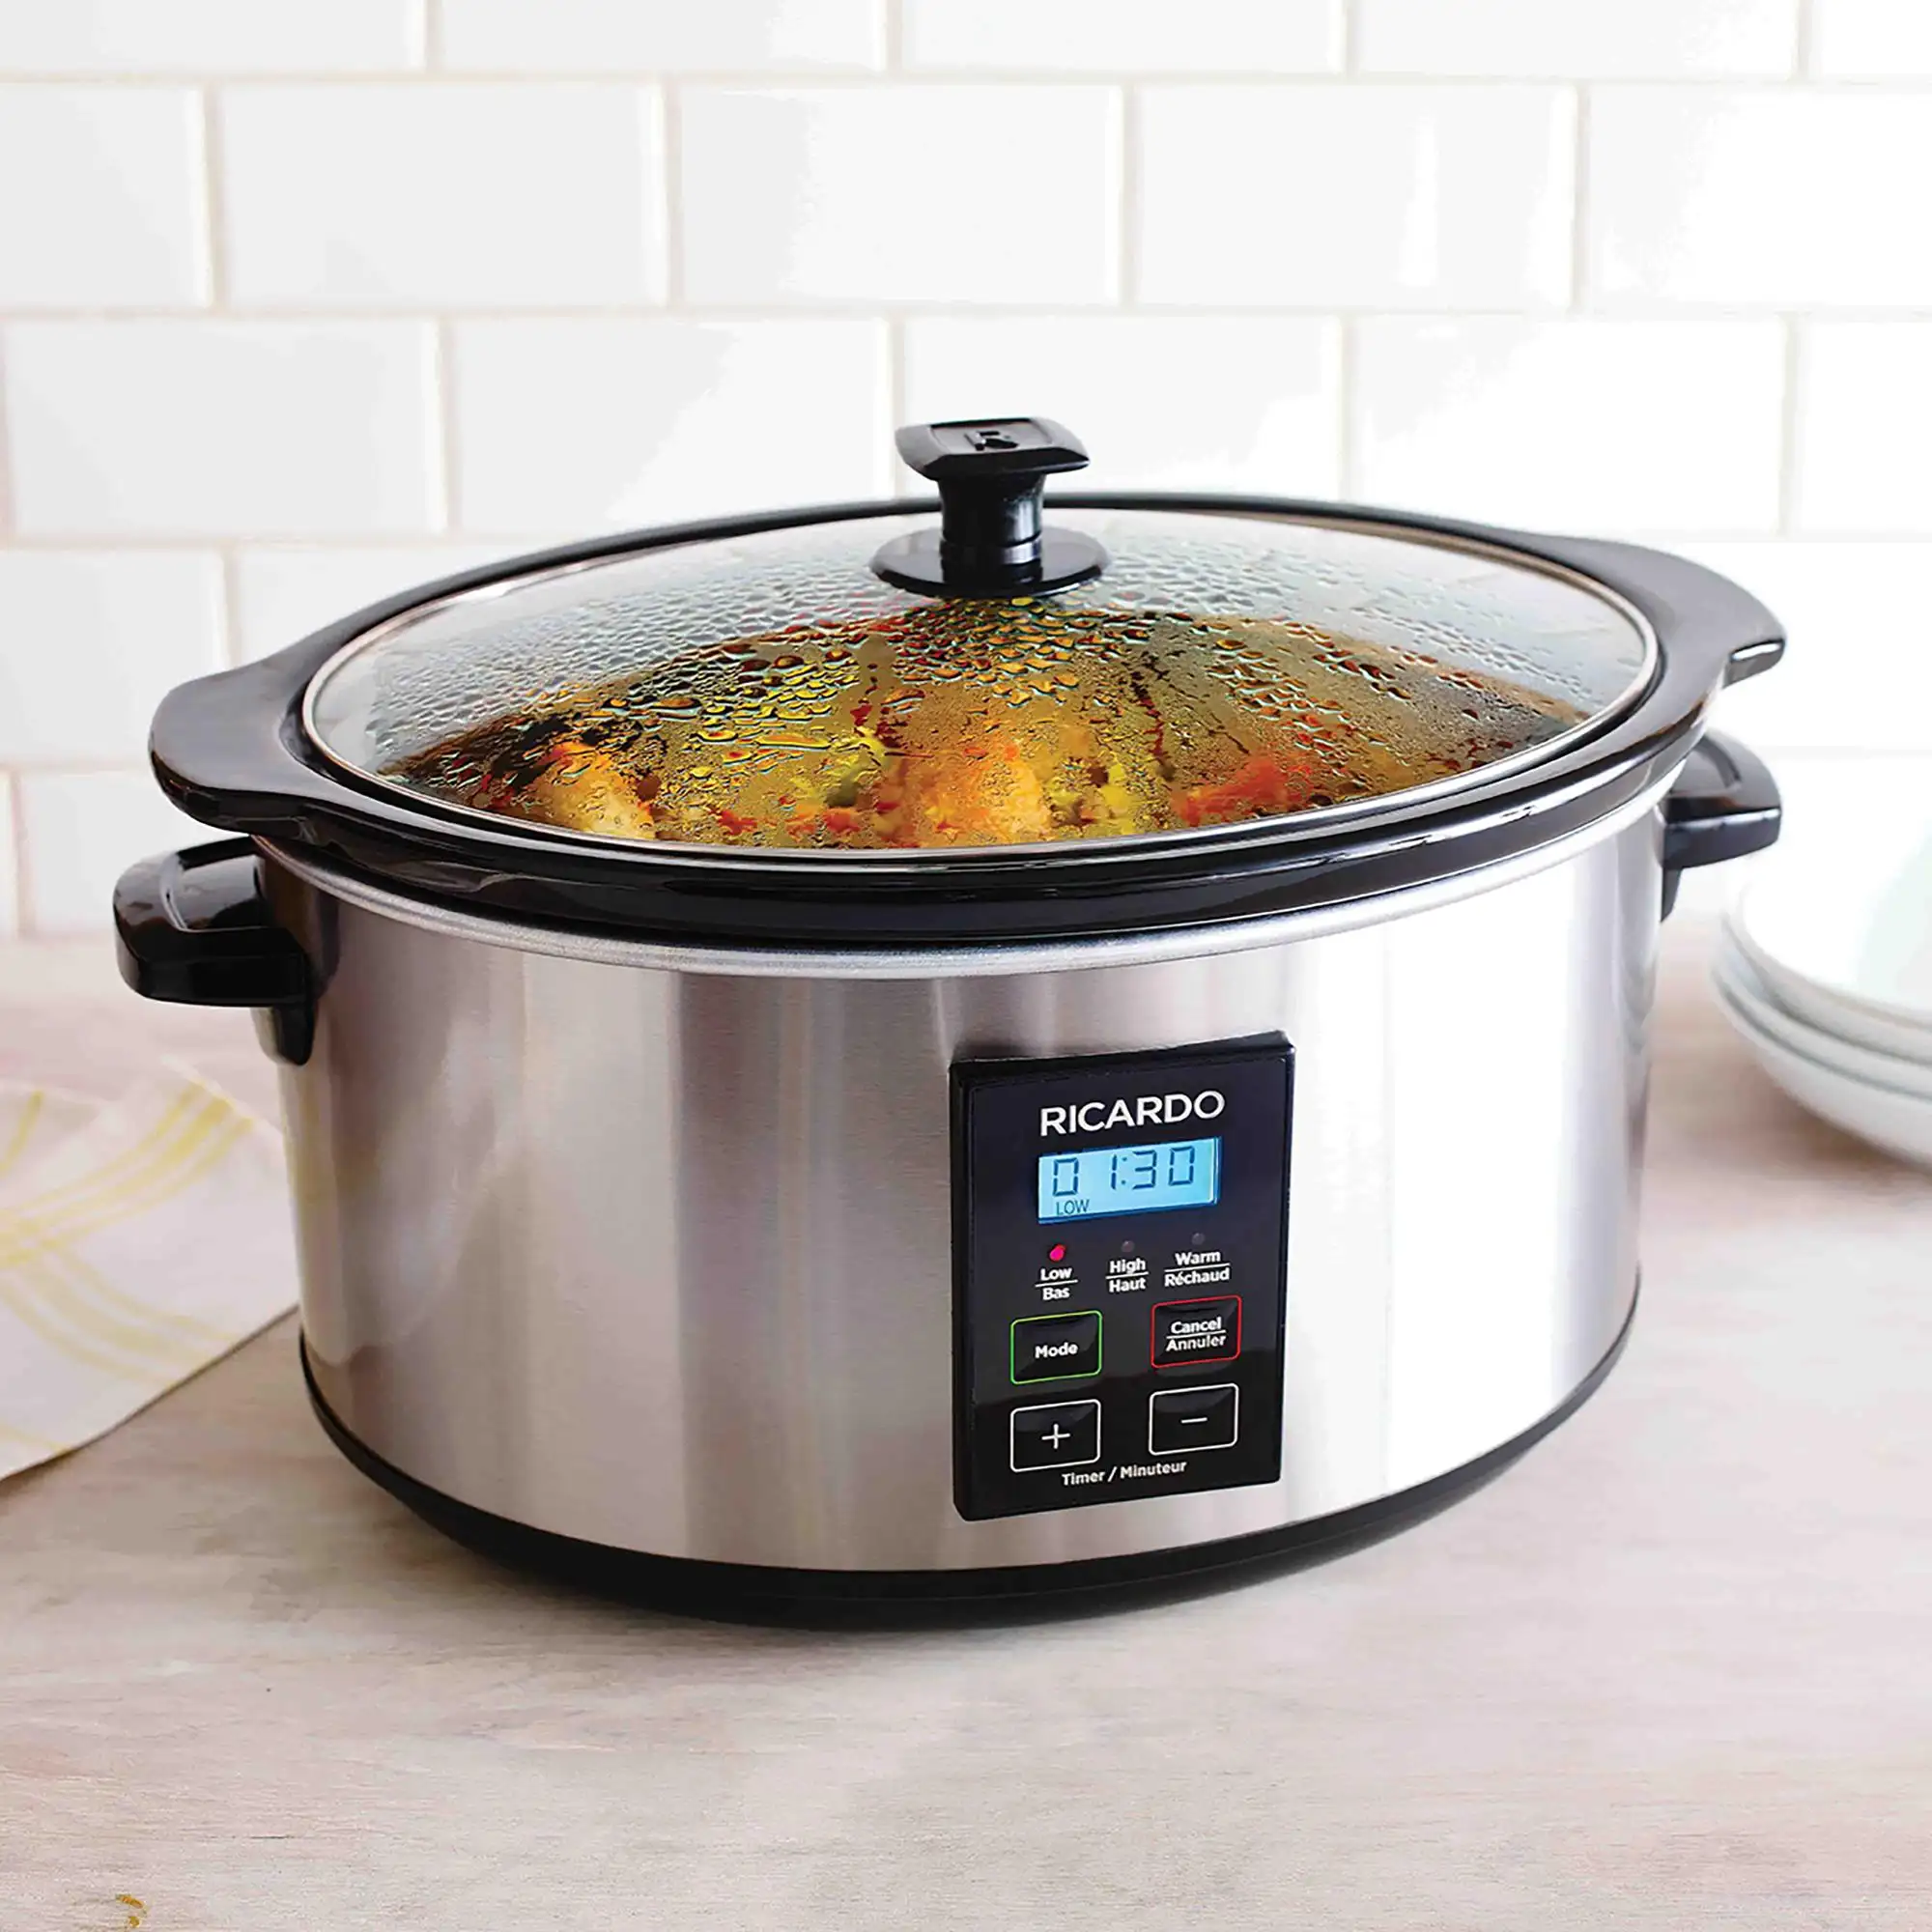  Brentwood SC-130S Slow Cooker Stainless Steel Body, 3-Quart:  Electric Cookers: Home & Kitchen